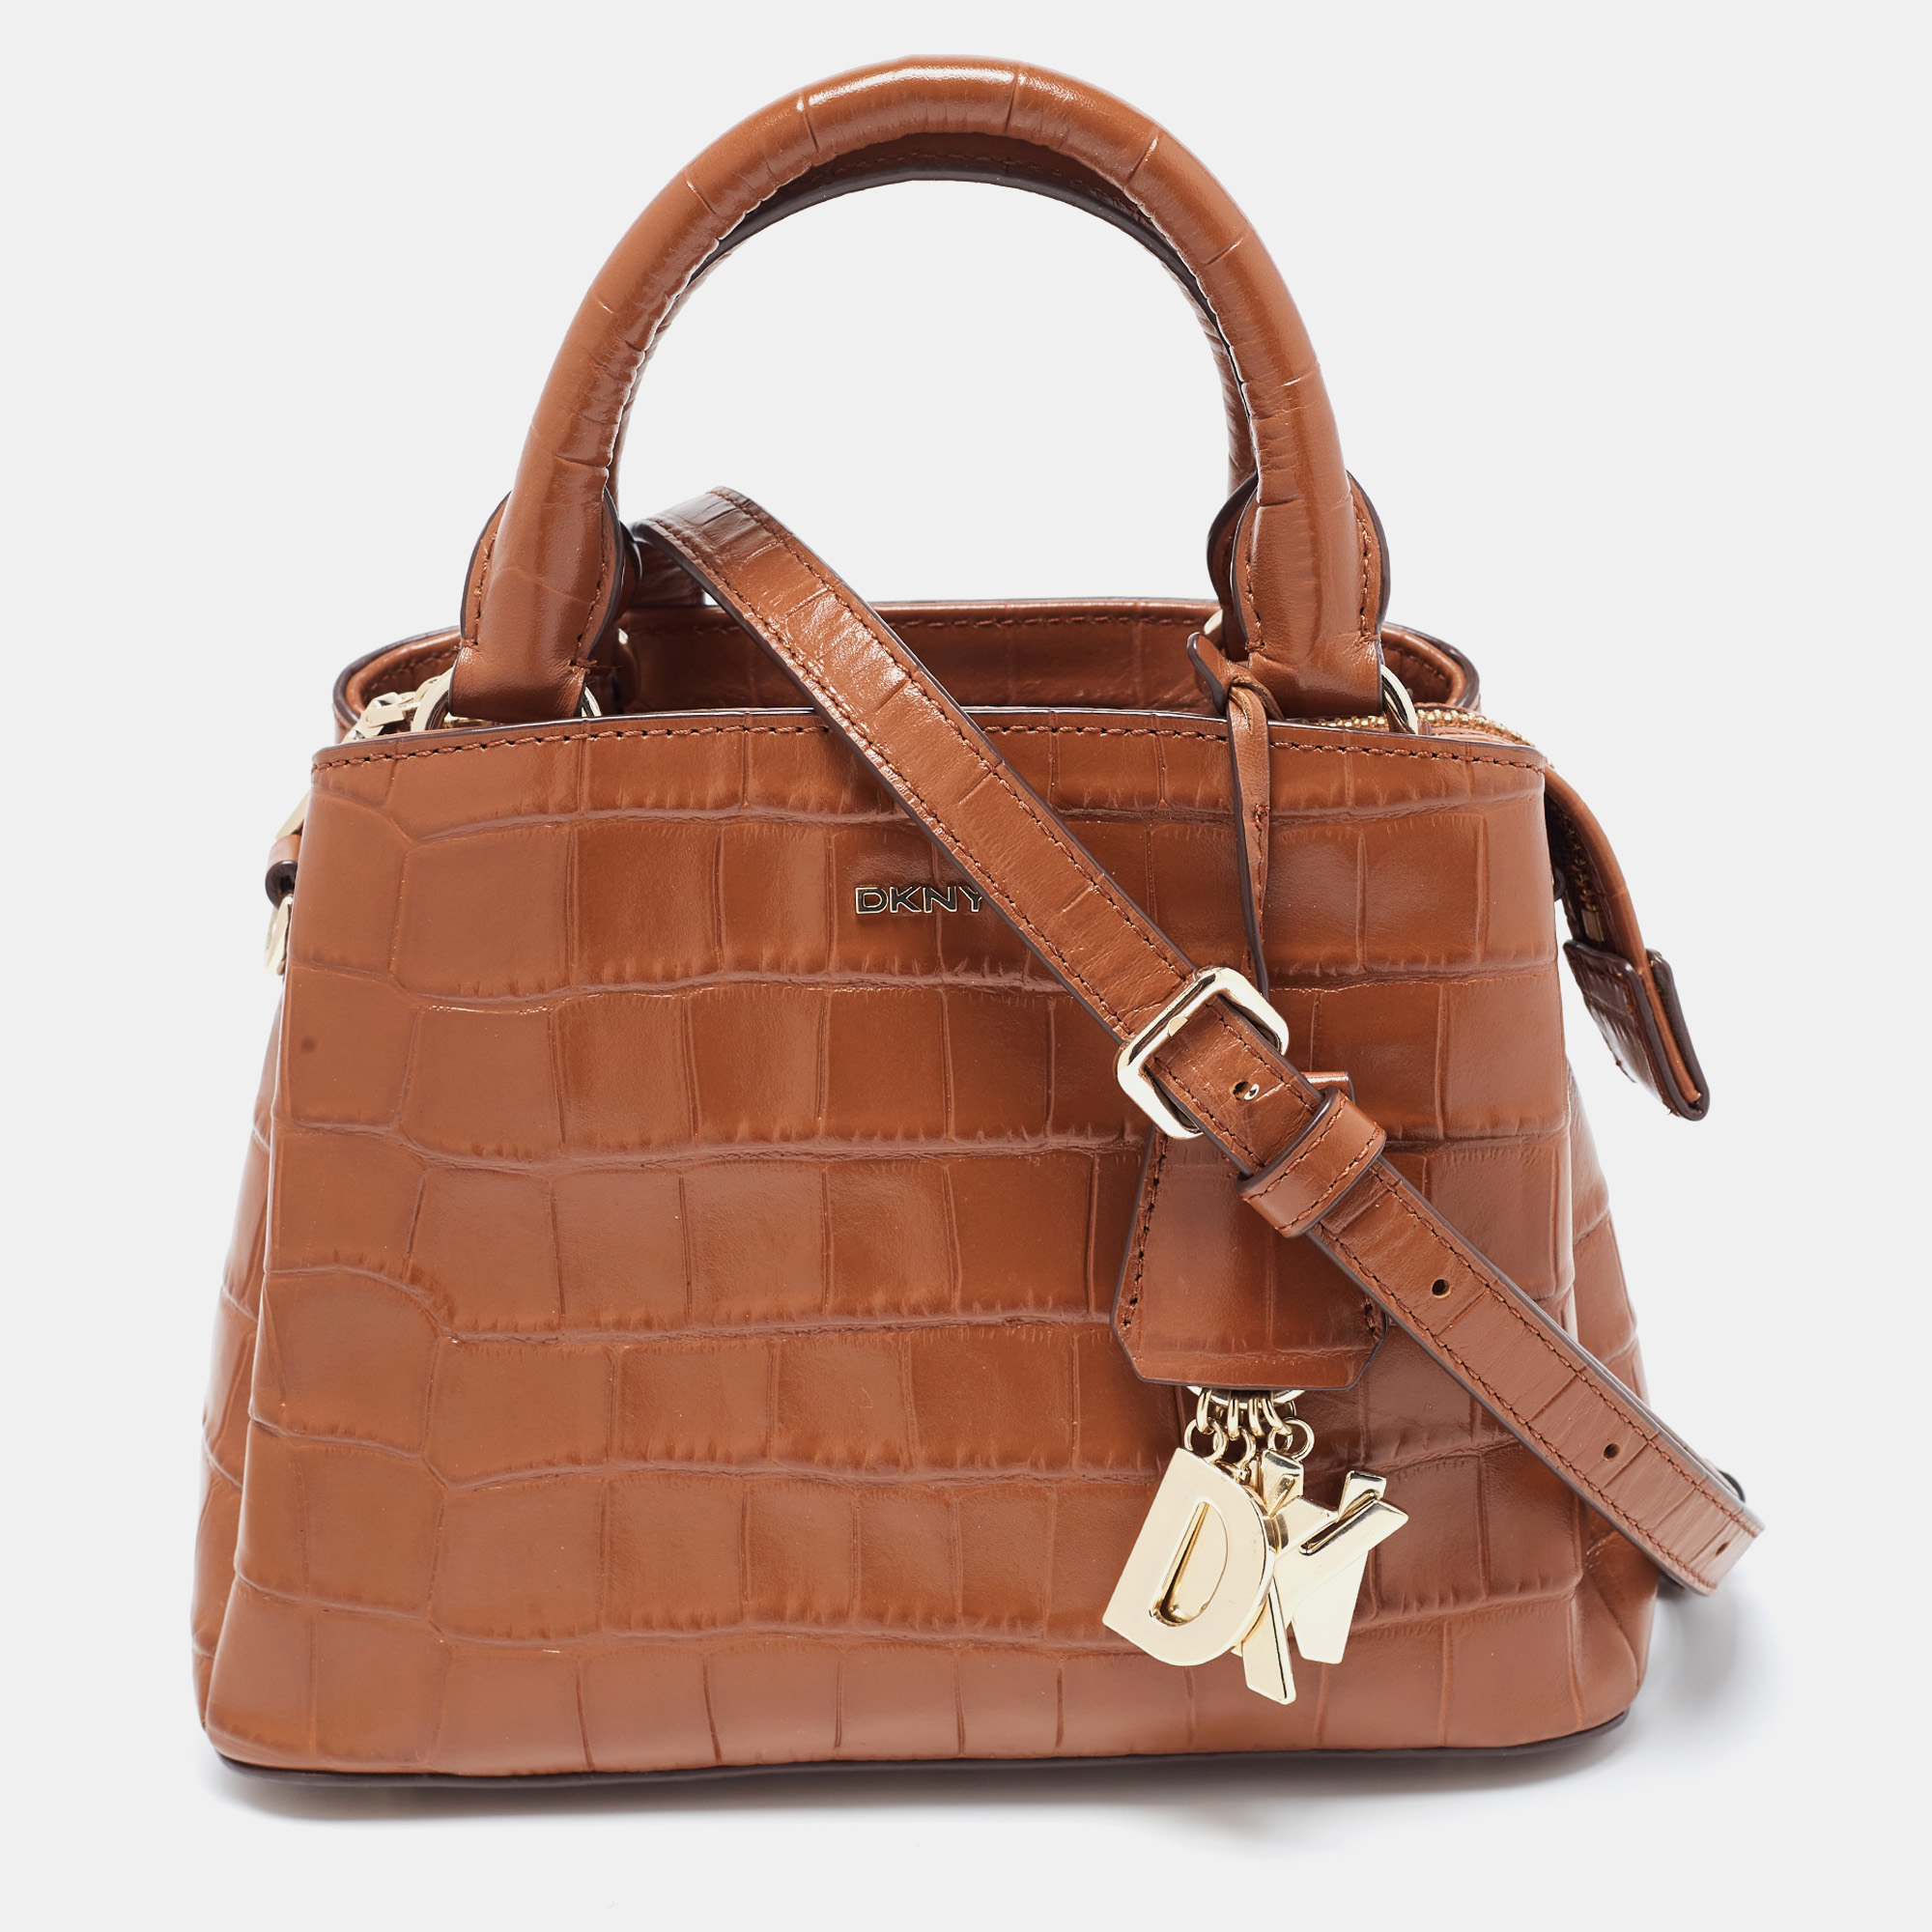 DKNY Brown Croc Embossed Leather Paige Tote